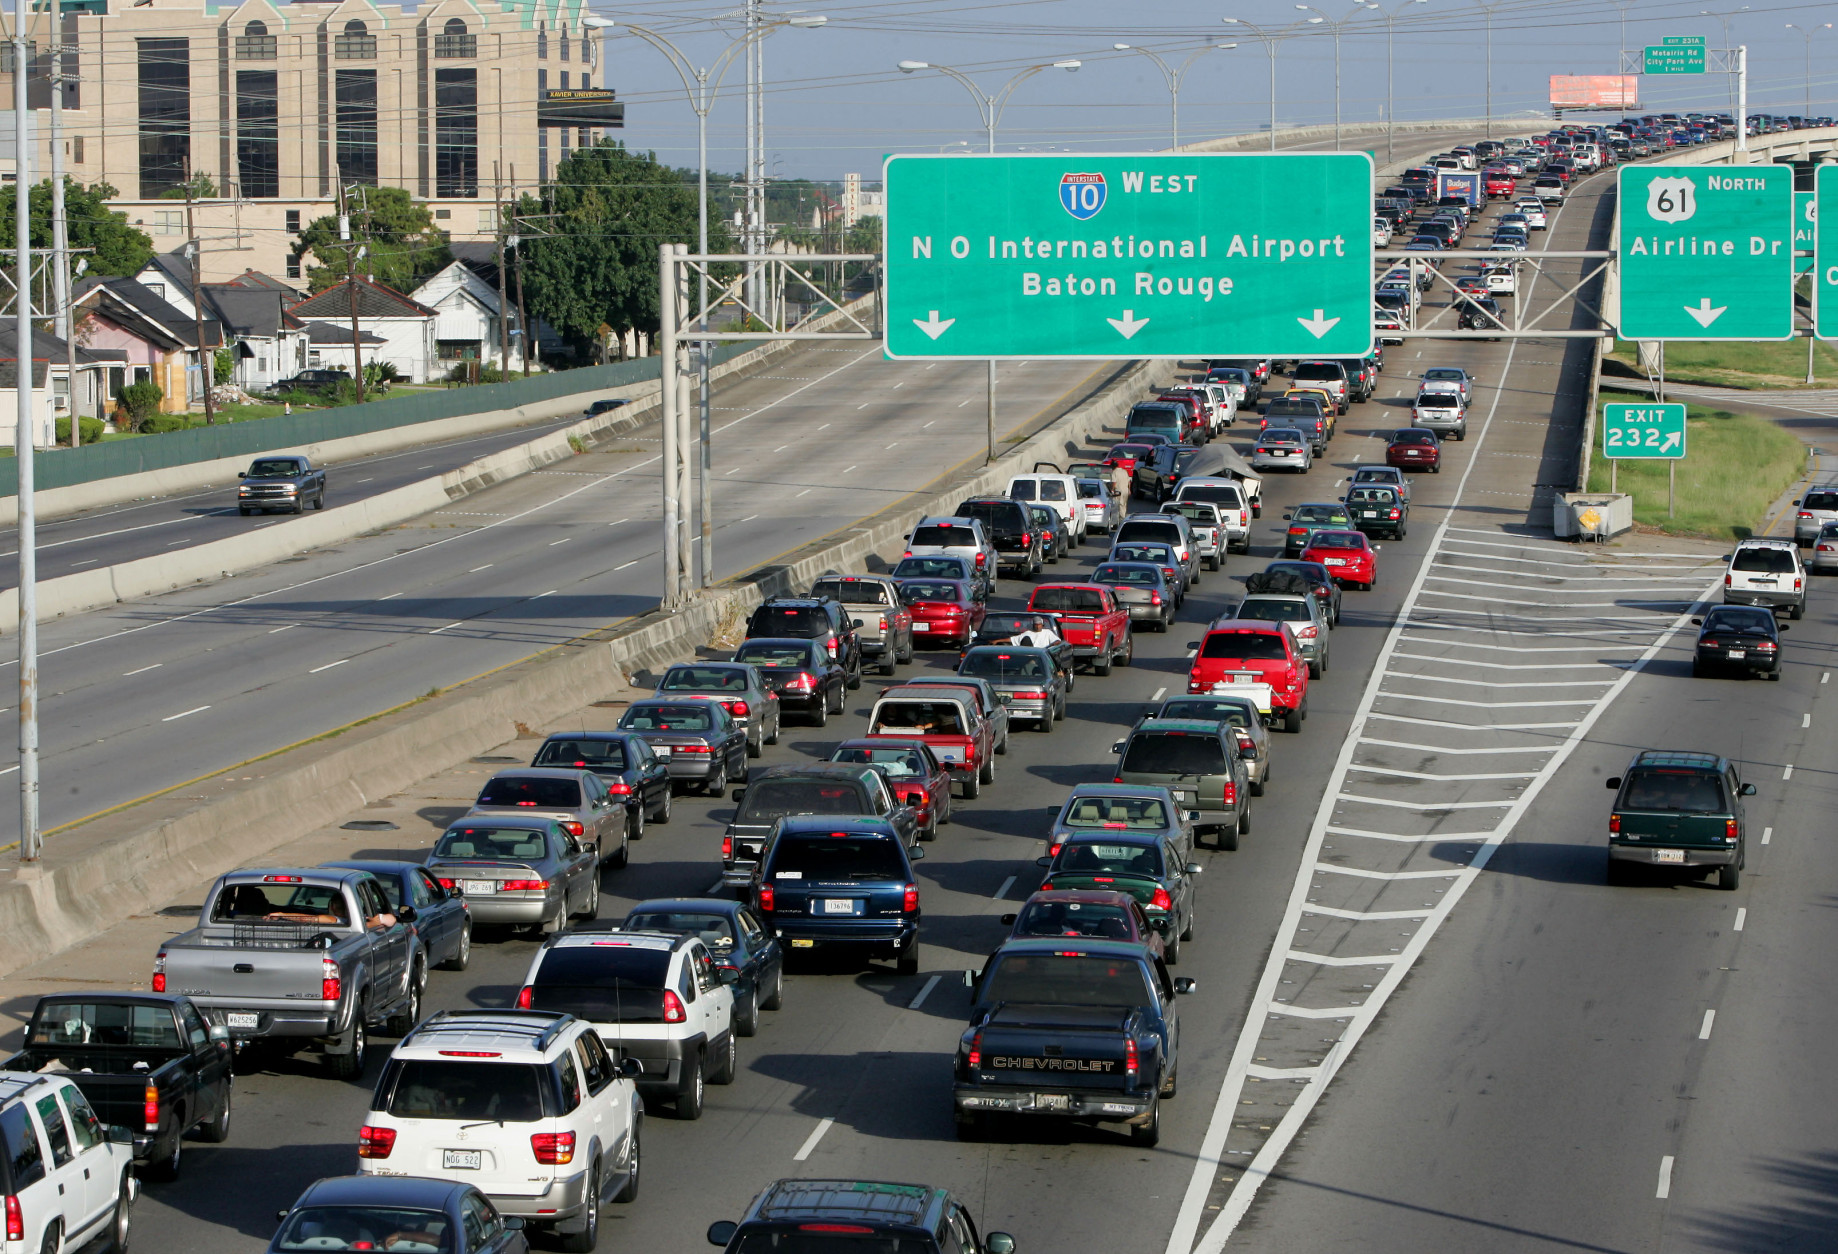 Interstate-10 westbound out of New Orleans continues to be jammed with traffic as residents evacuate ahead of Hurricane Katrina on Sunday, Aug. 28, 2005.  The Category 5 storm is expected to make landfall on Monday. (AP Photo/Dave Martin)